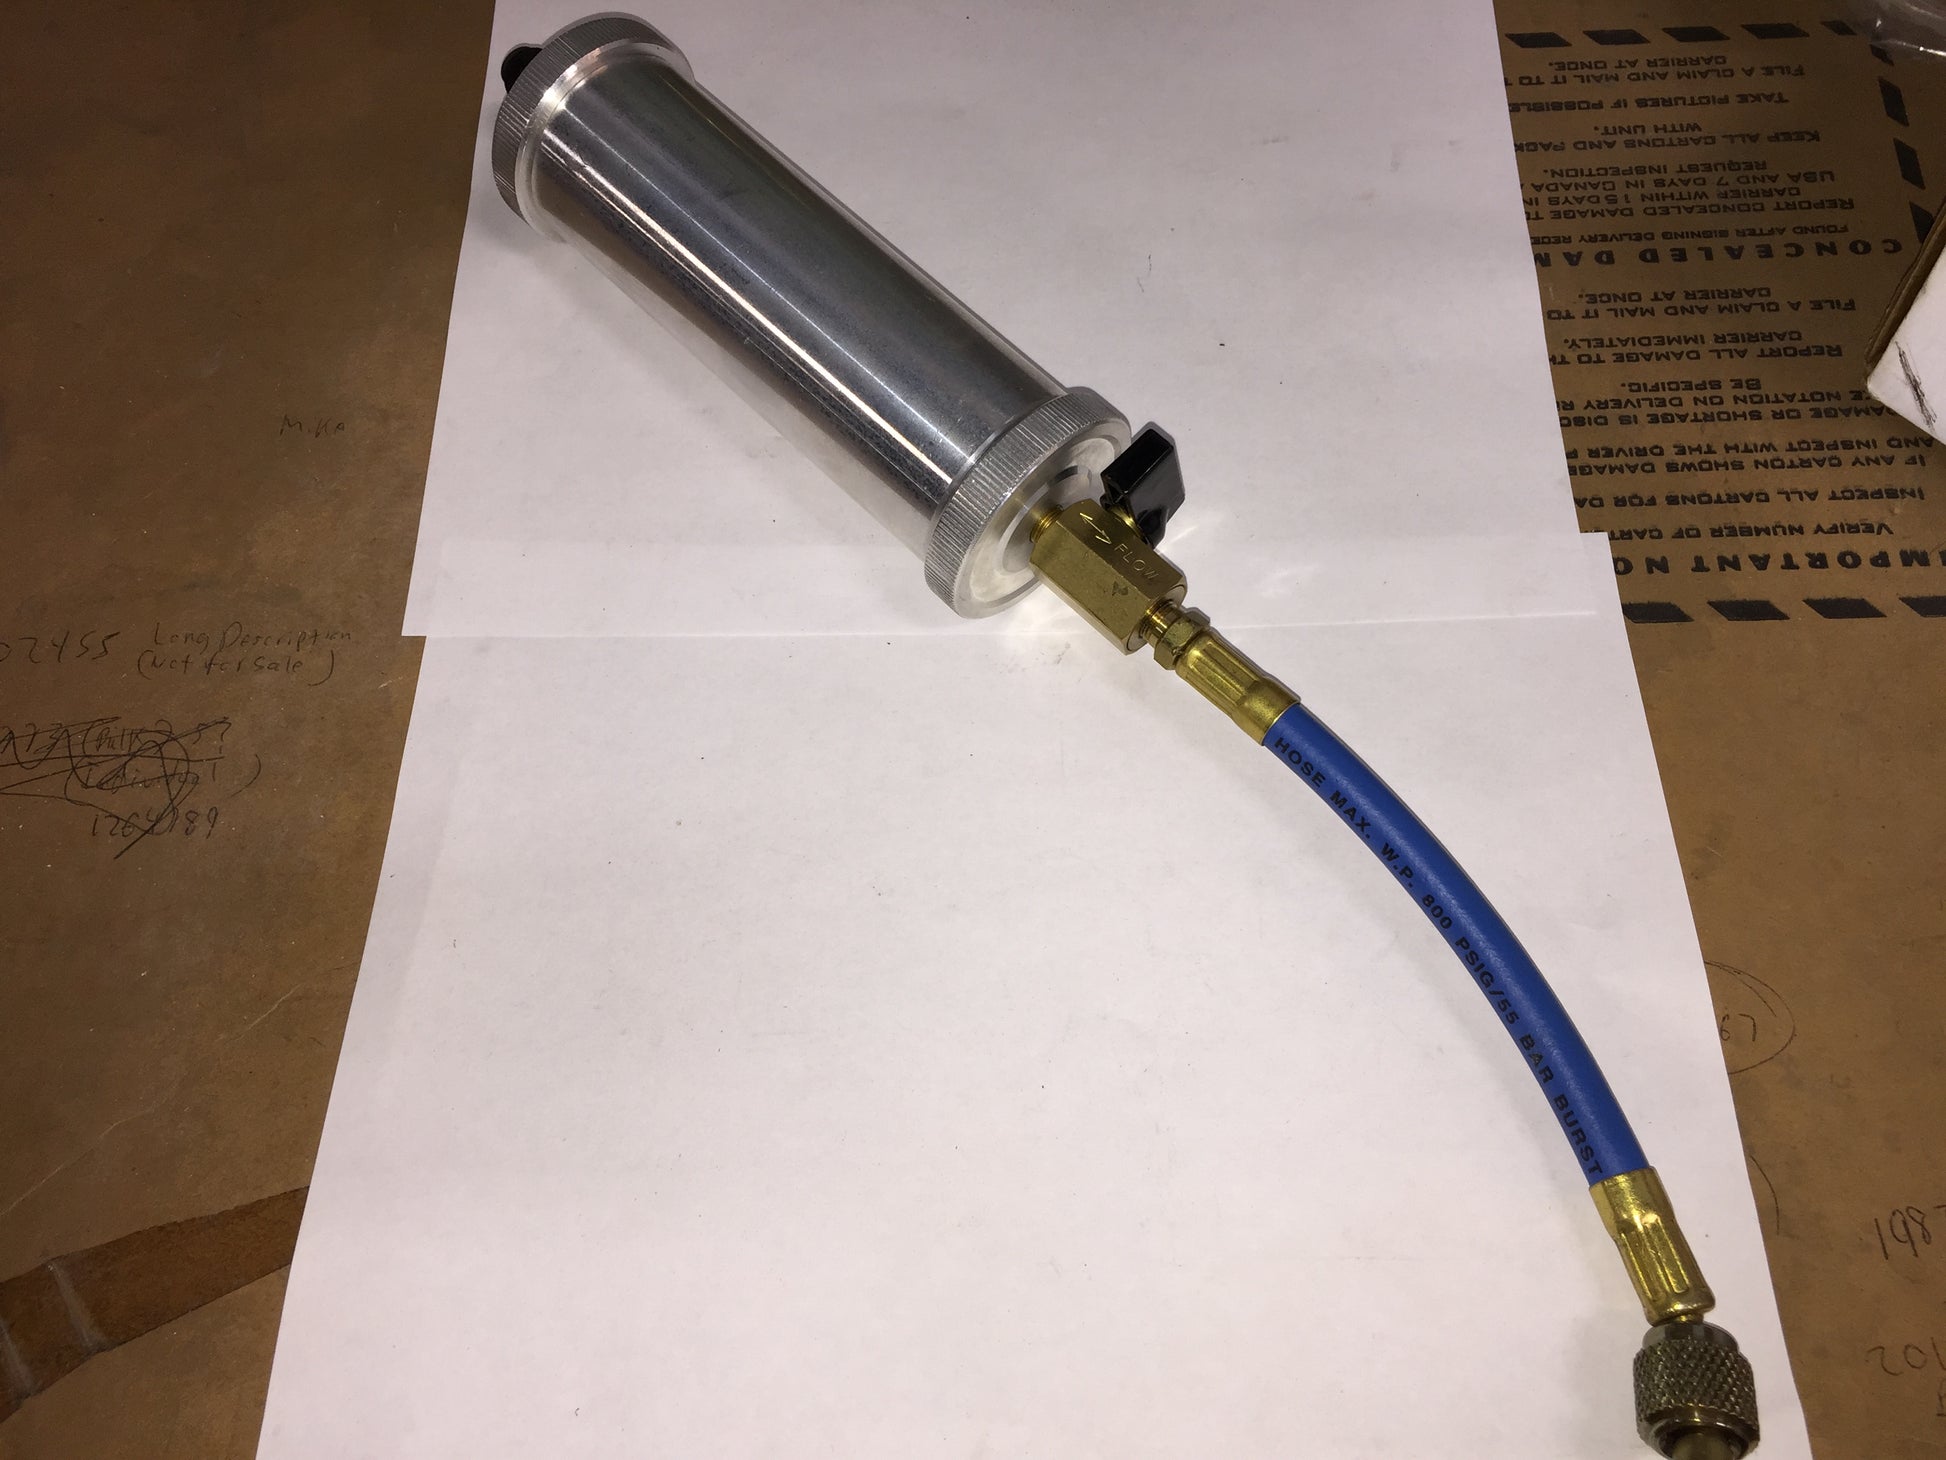 A/C RE-NEW INJECTOR TOOL FOR  A/C R-RENEW LUBRICANT 